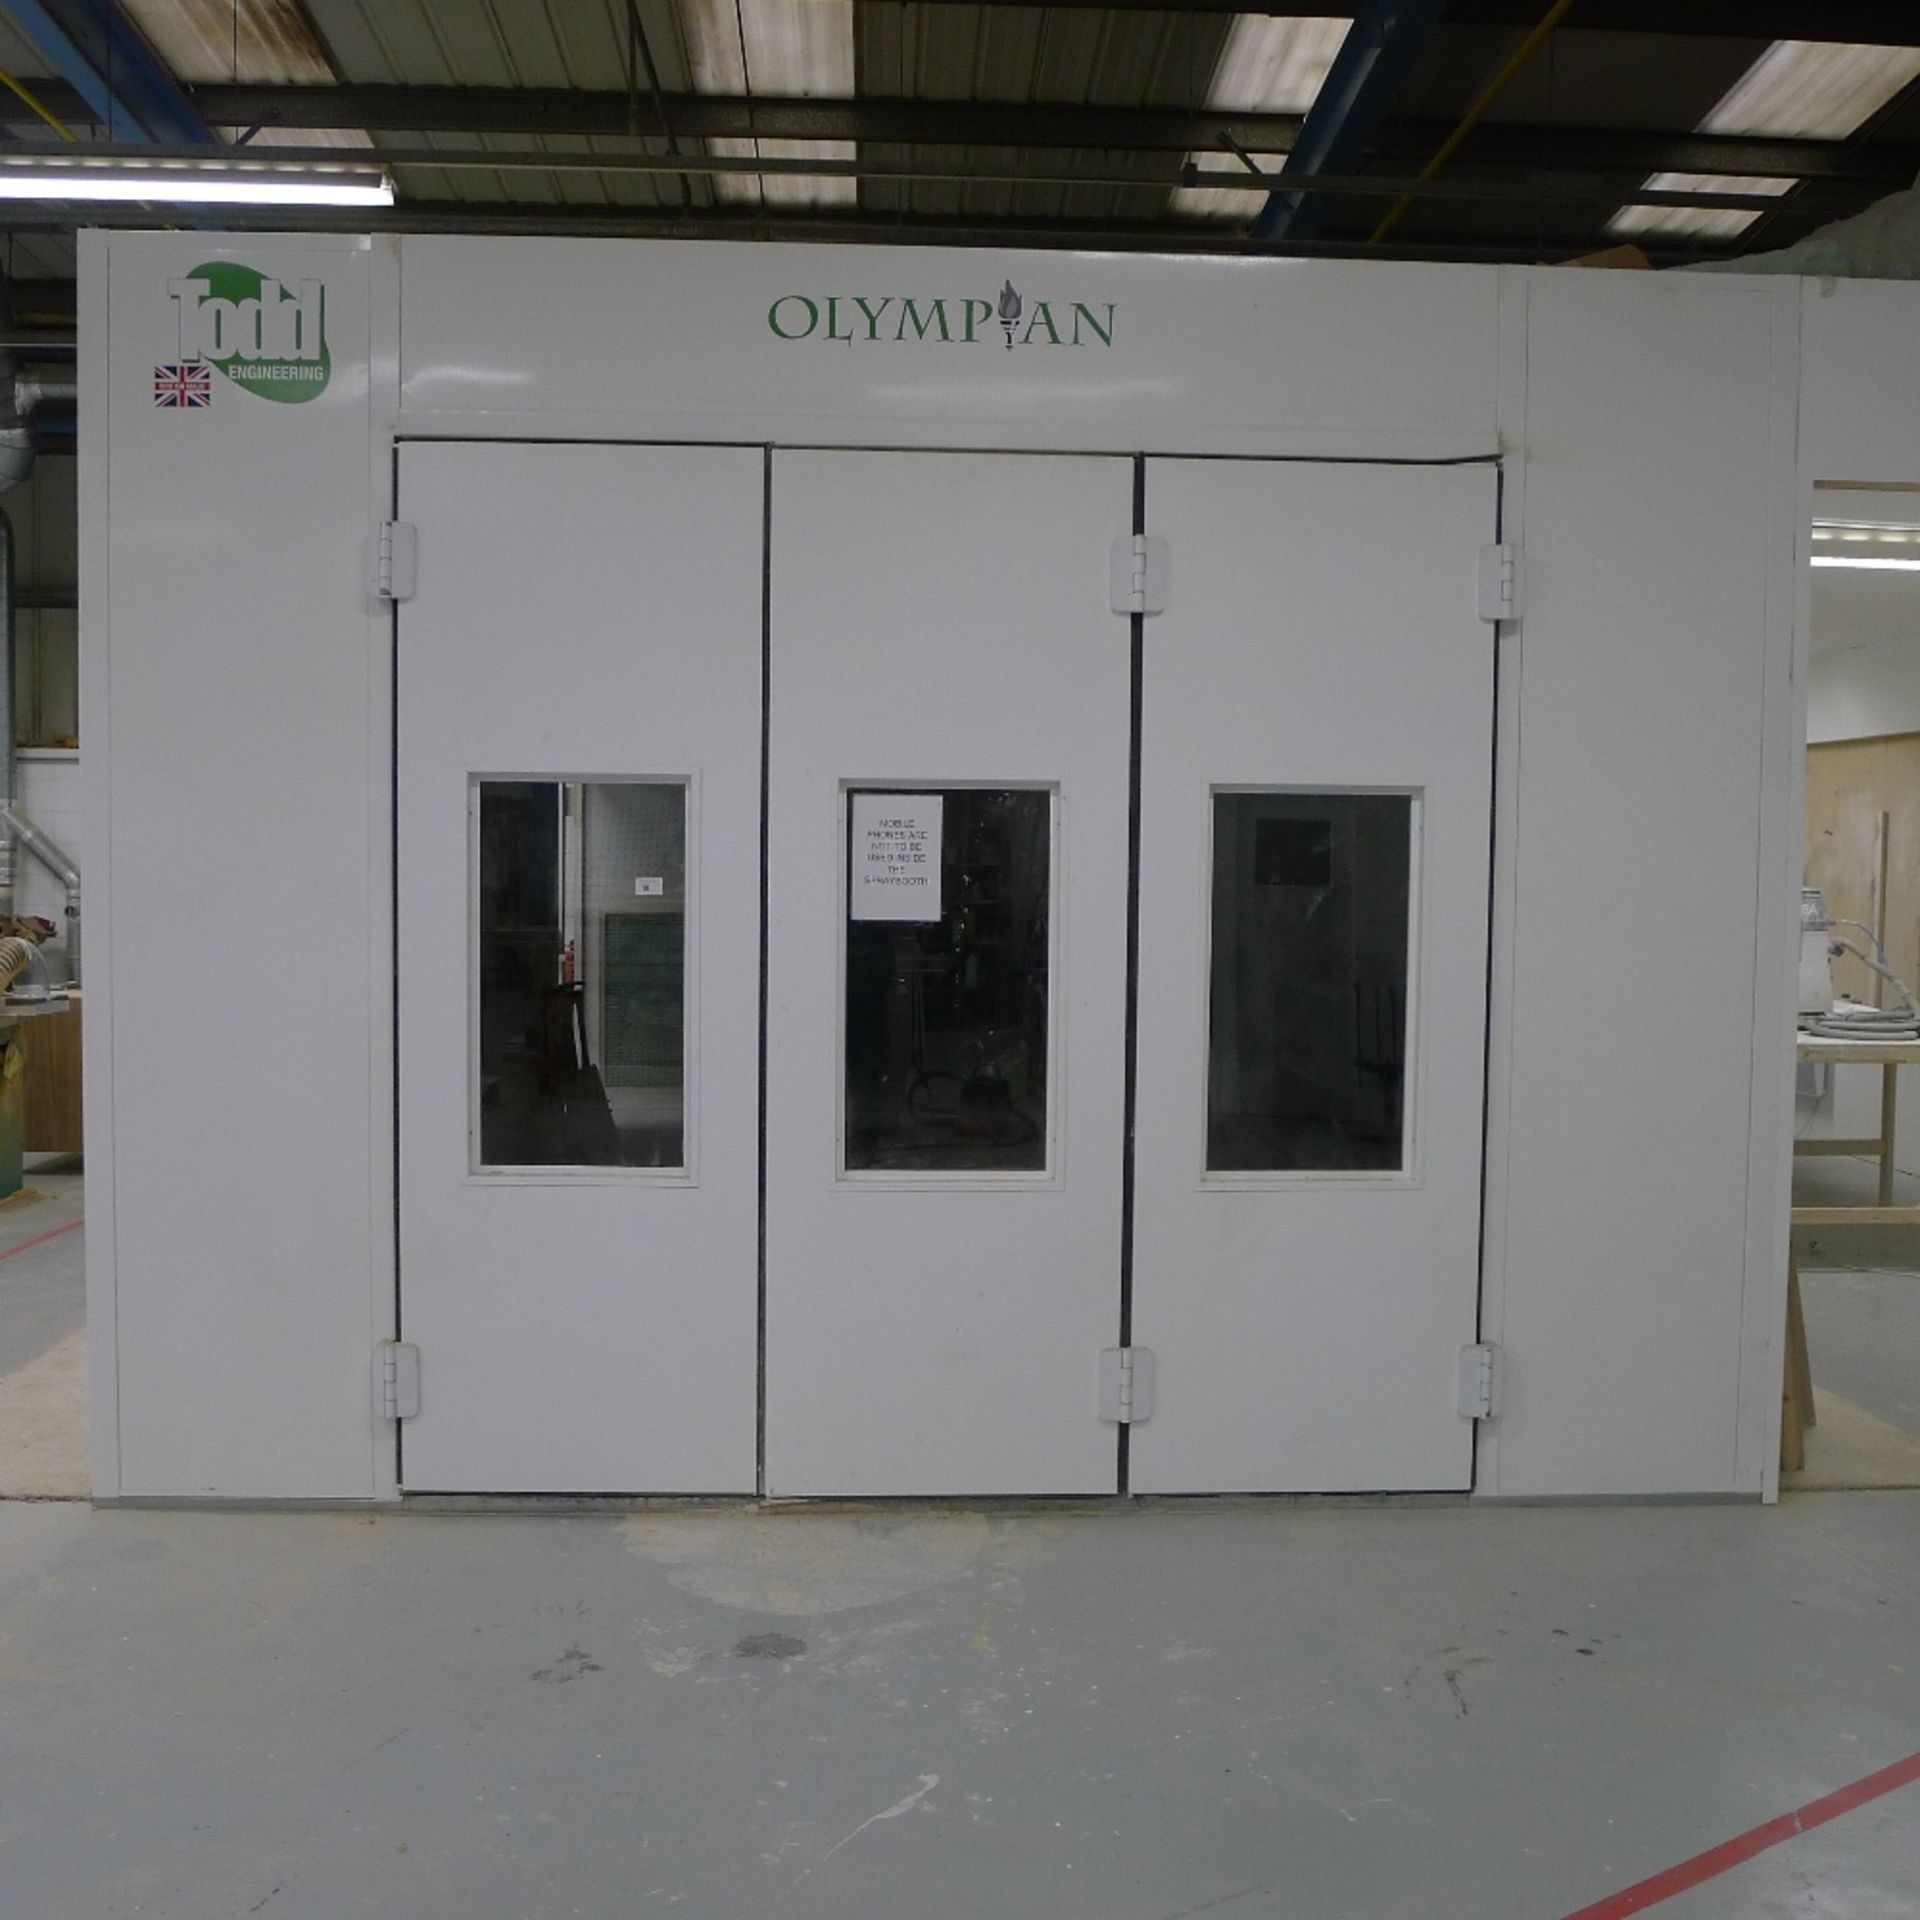 1 heated spray booth by Todd Engineering type Olympian 1000 series, approx 24 ft x 12 ft with tri- - Image 2 of 11